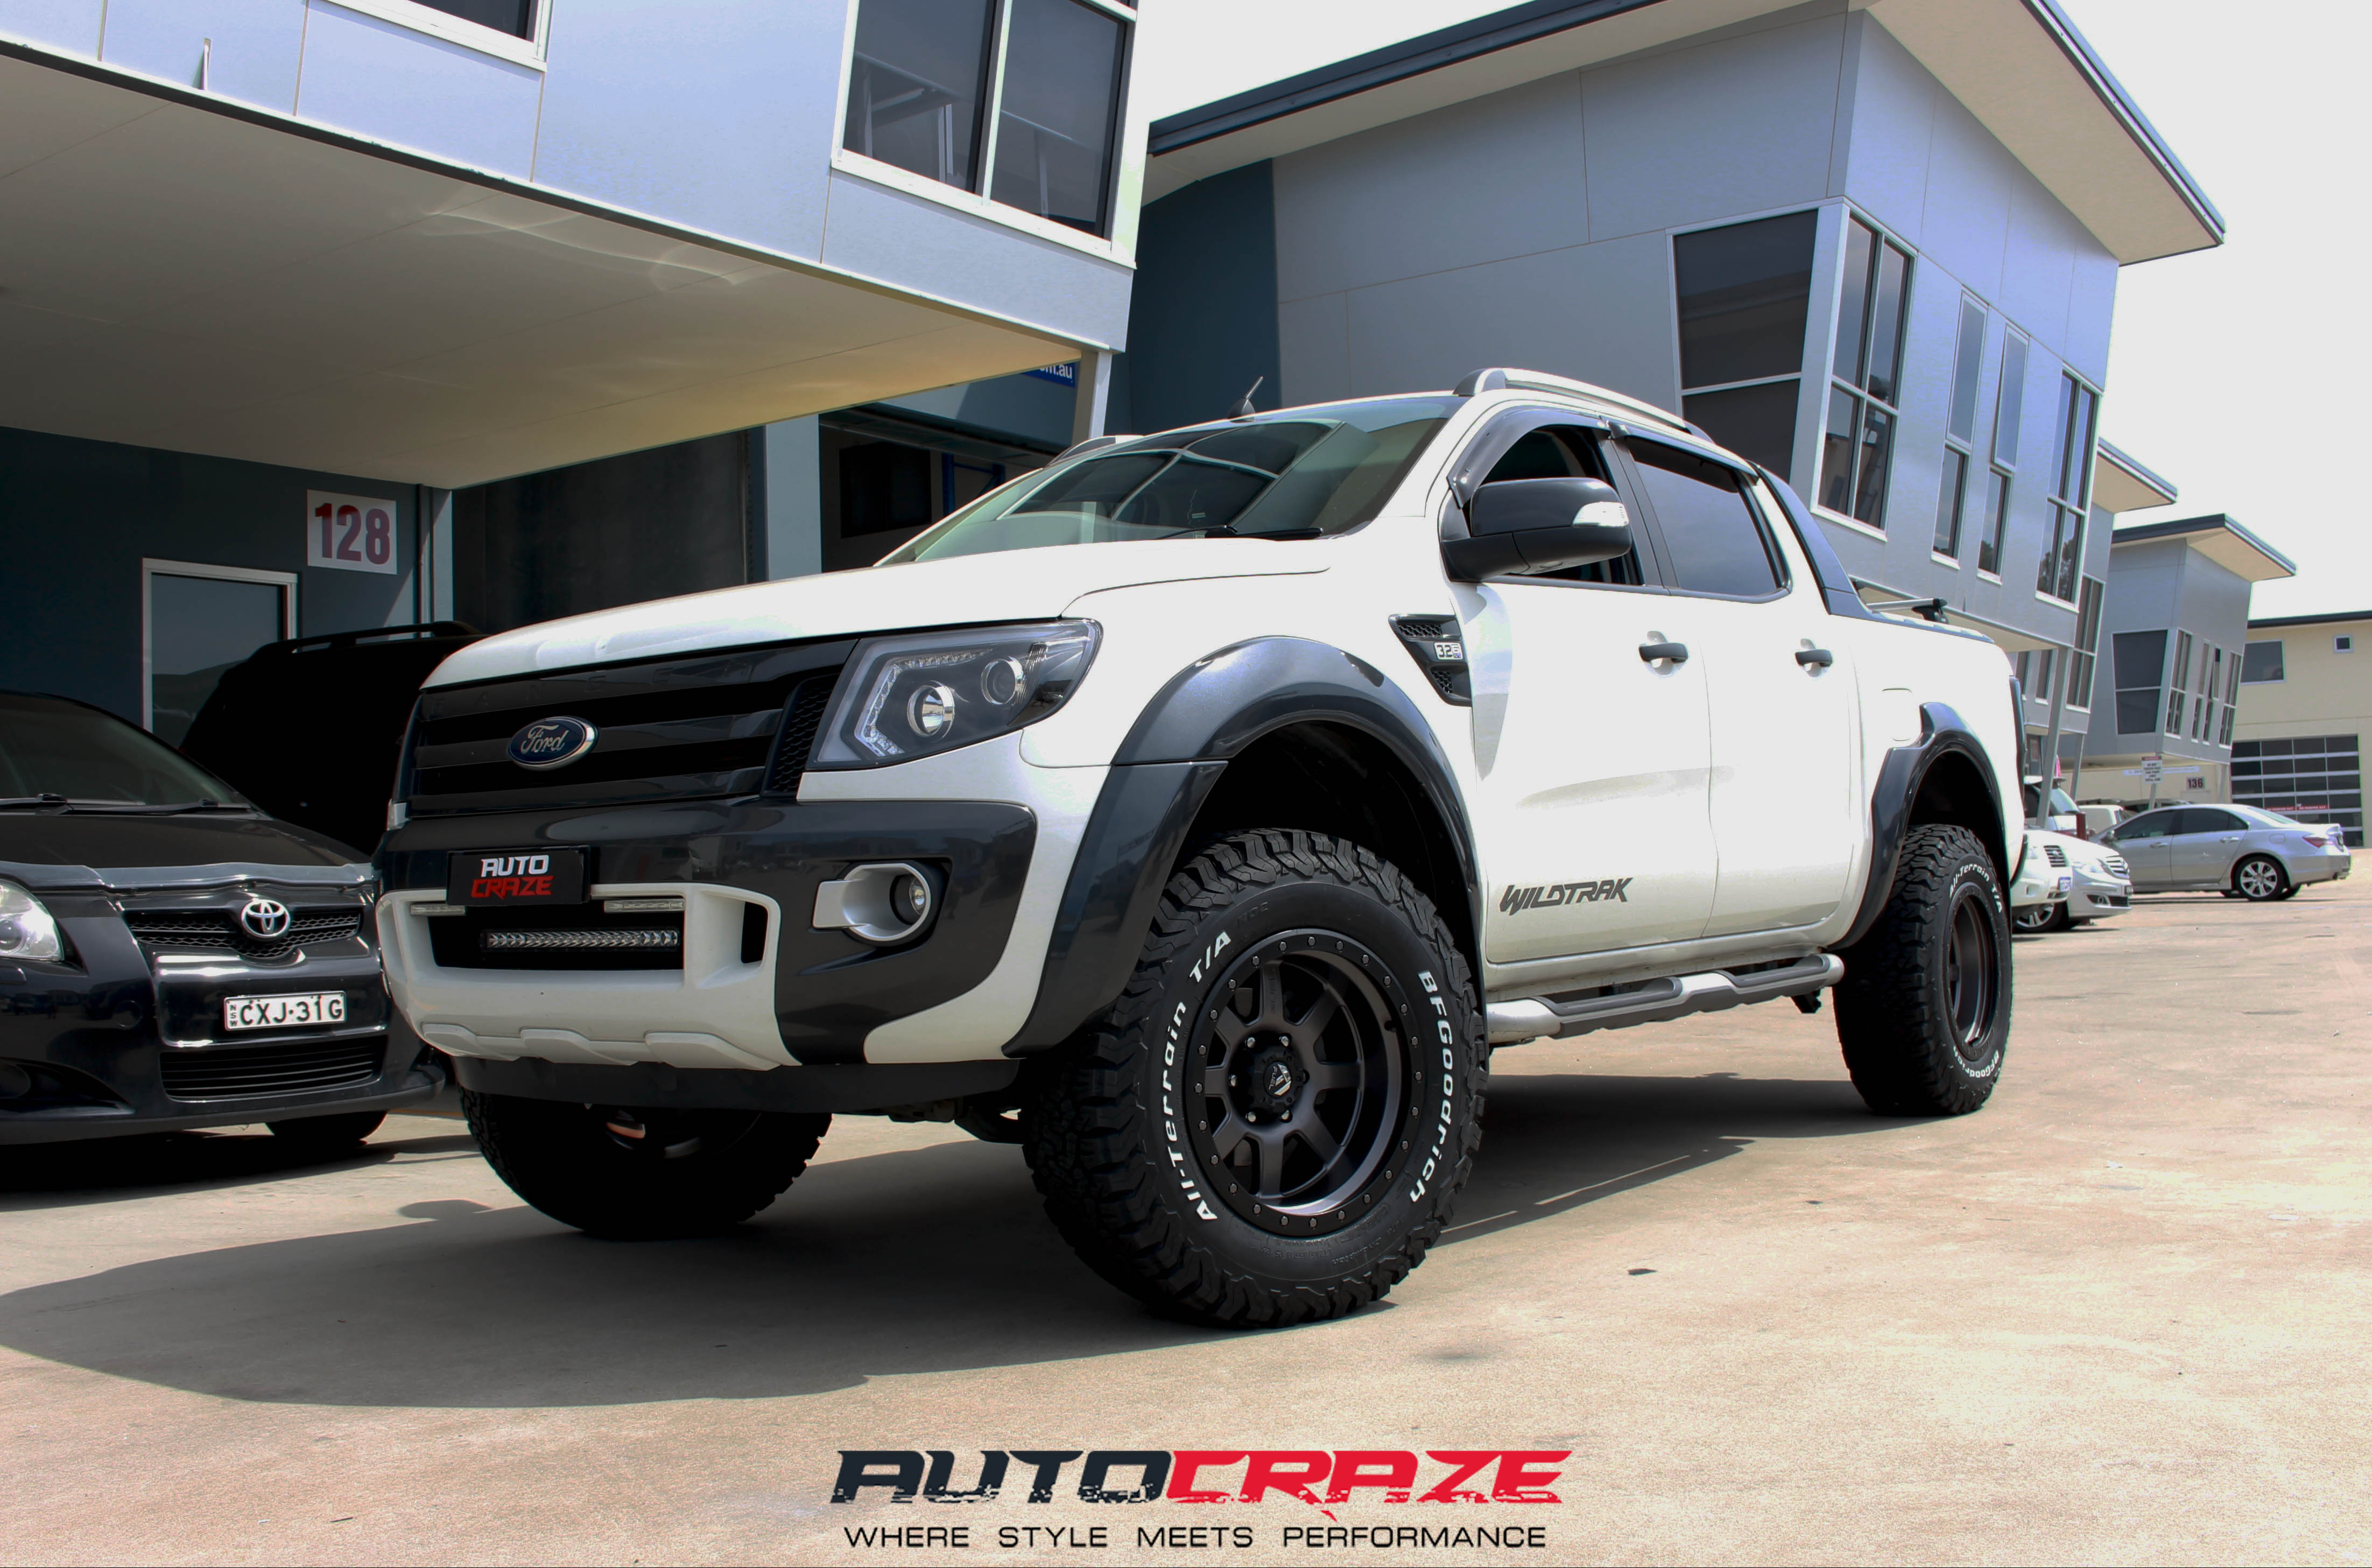 Ford Ranger Wheels Size | Buy Ranger Rims And Tyres For Sale ...